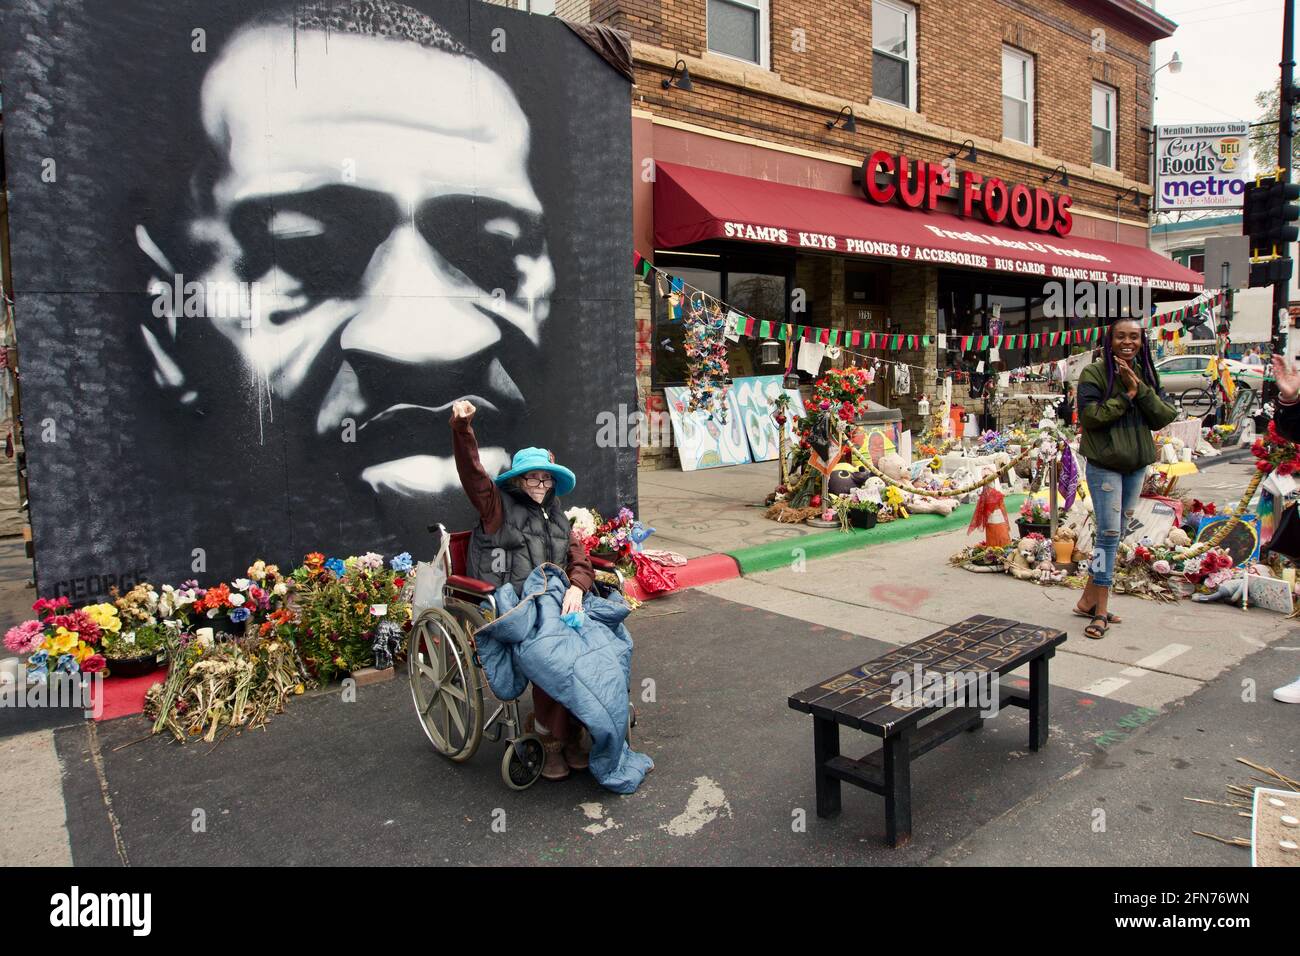 Karen Cato has late stage cancer, last wish was to visit George Floyd Square. Disabled elderly white woman with fist in air at mural. Minneapolis, MN. Stock Photo